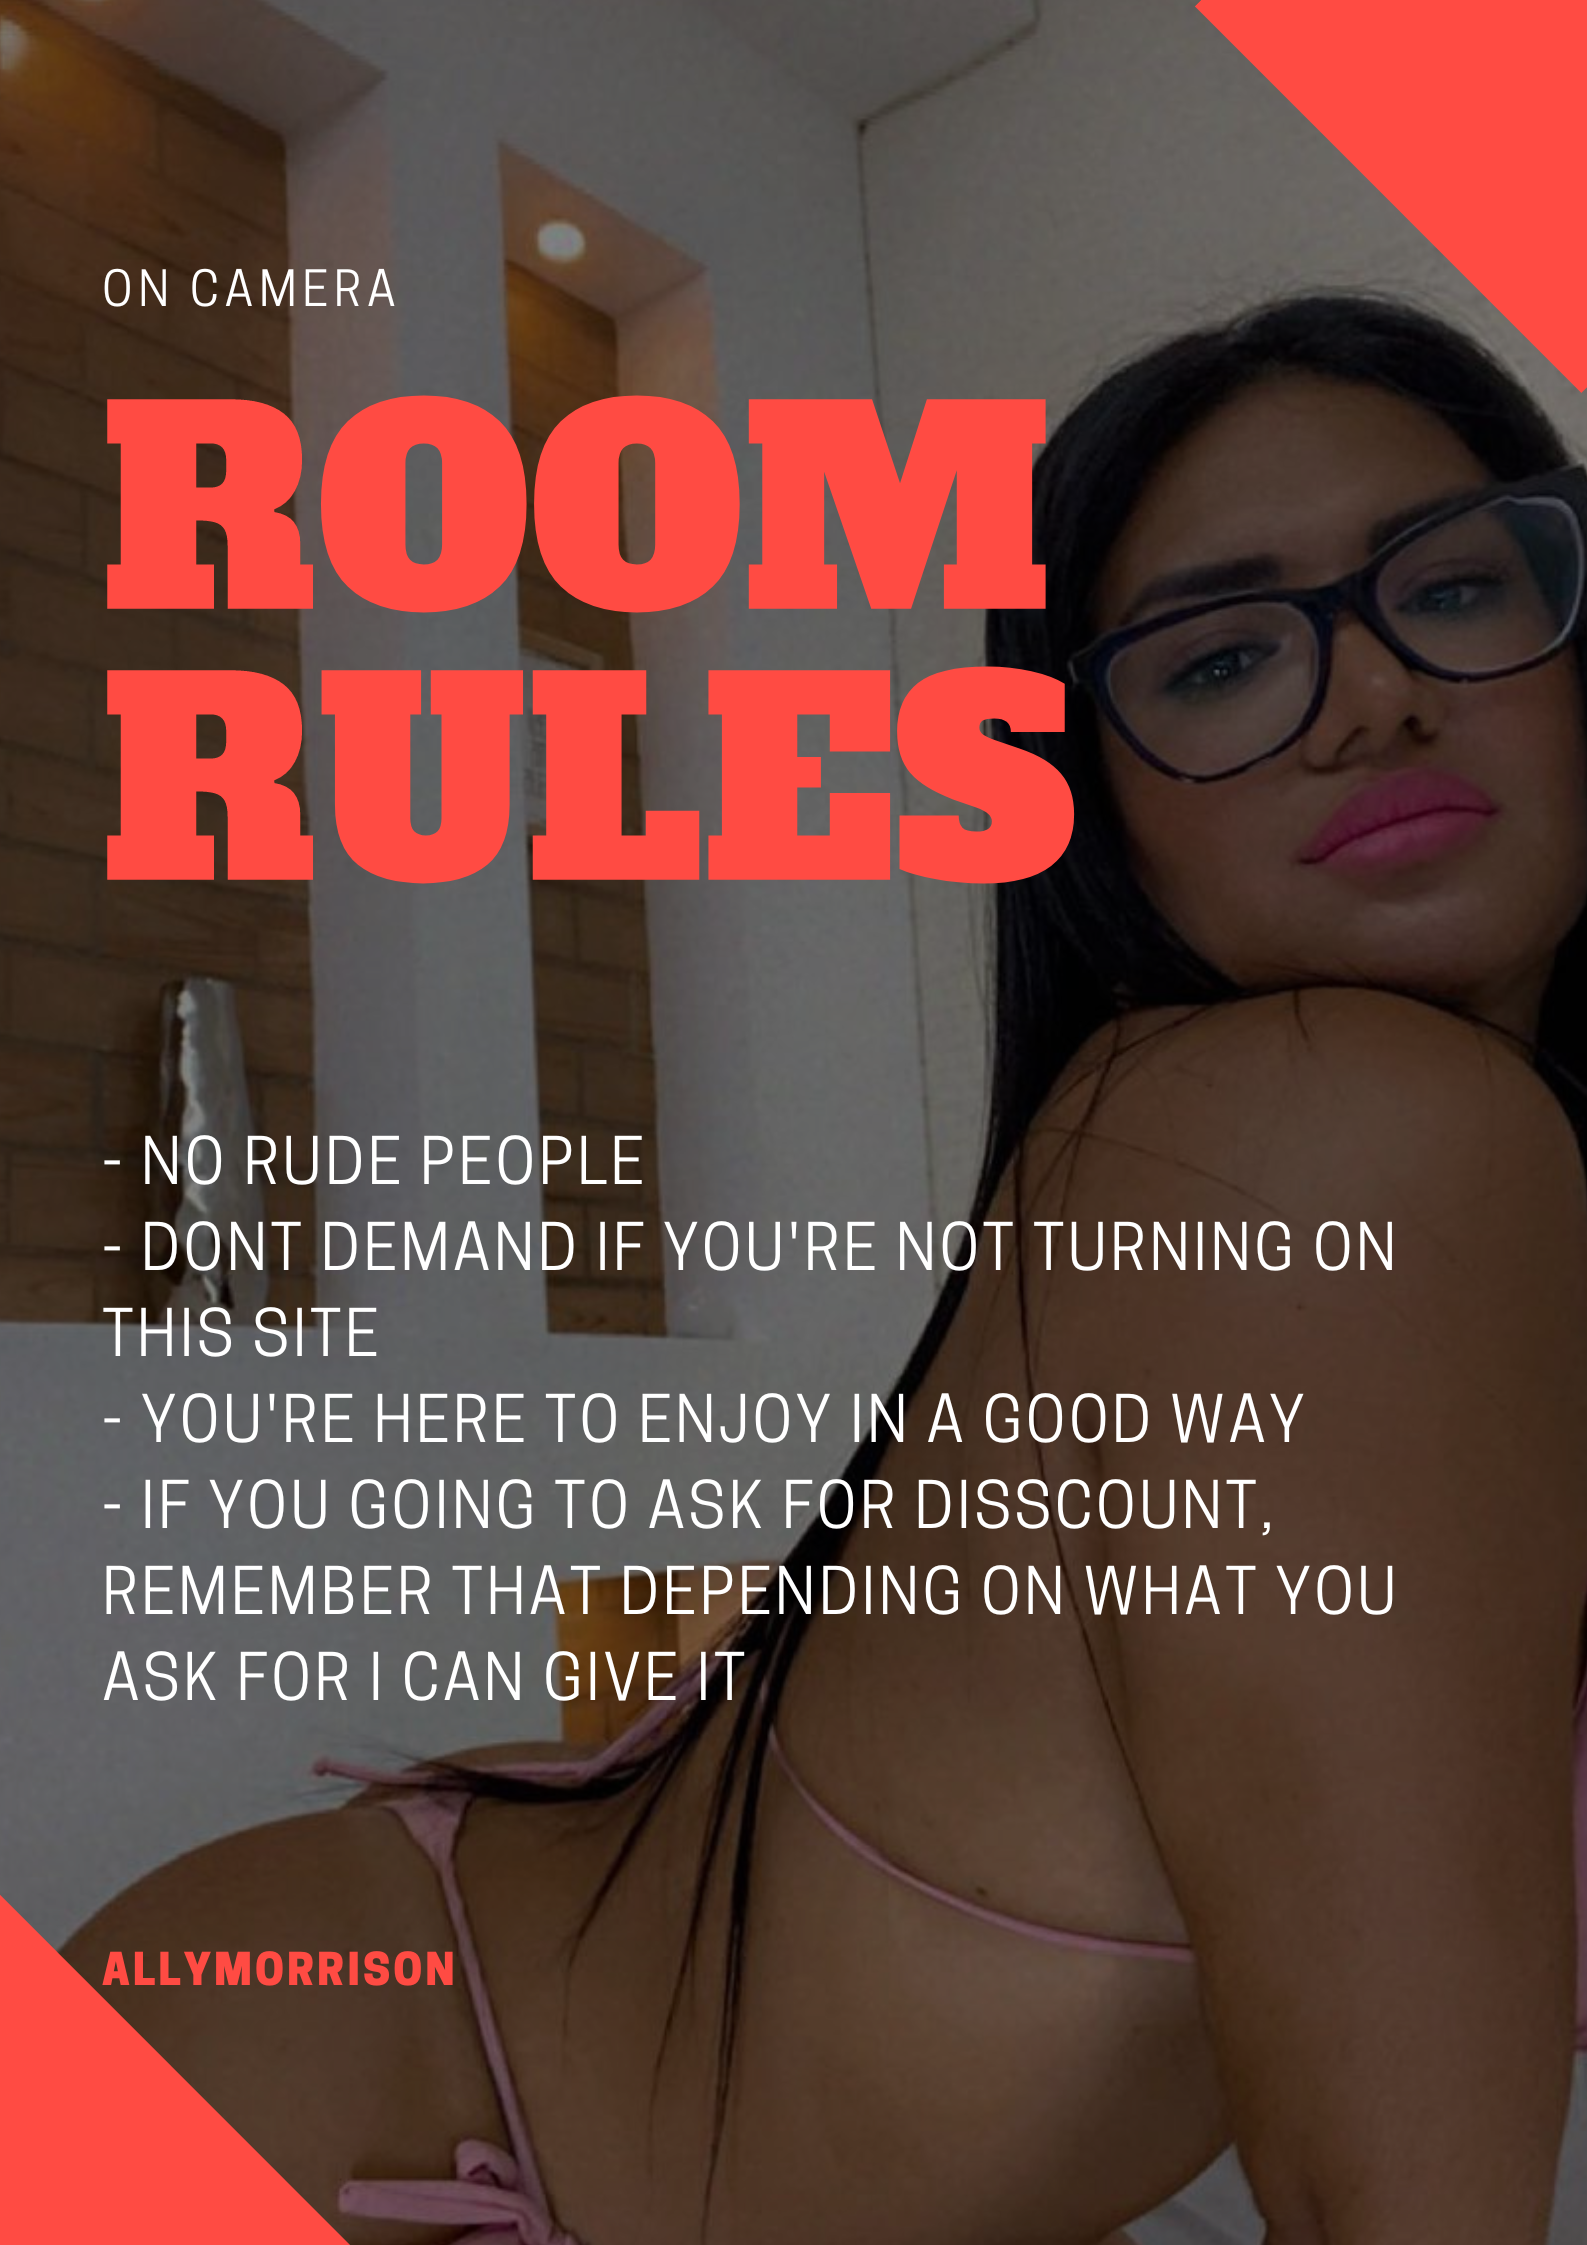 AllyMorrison ROOM RULES image: 1